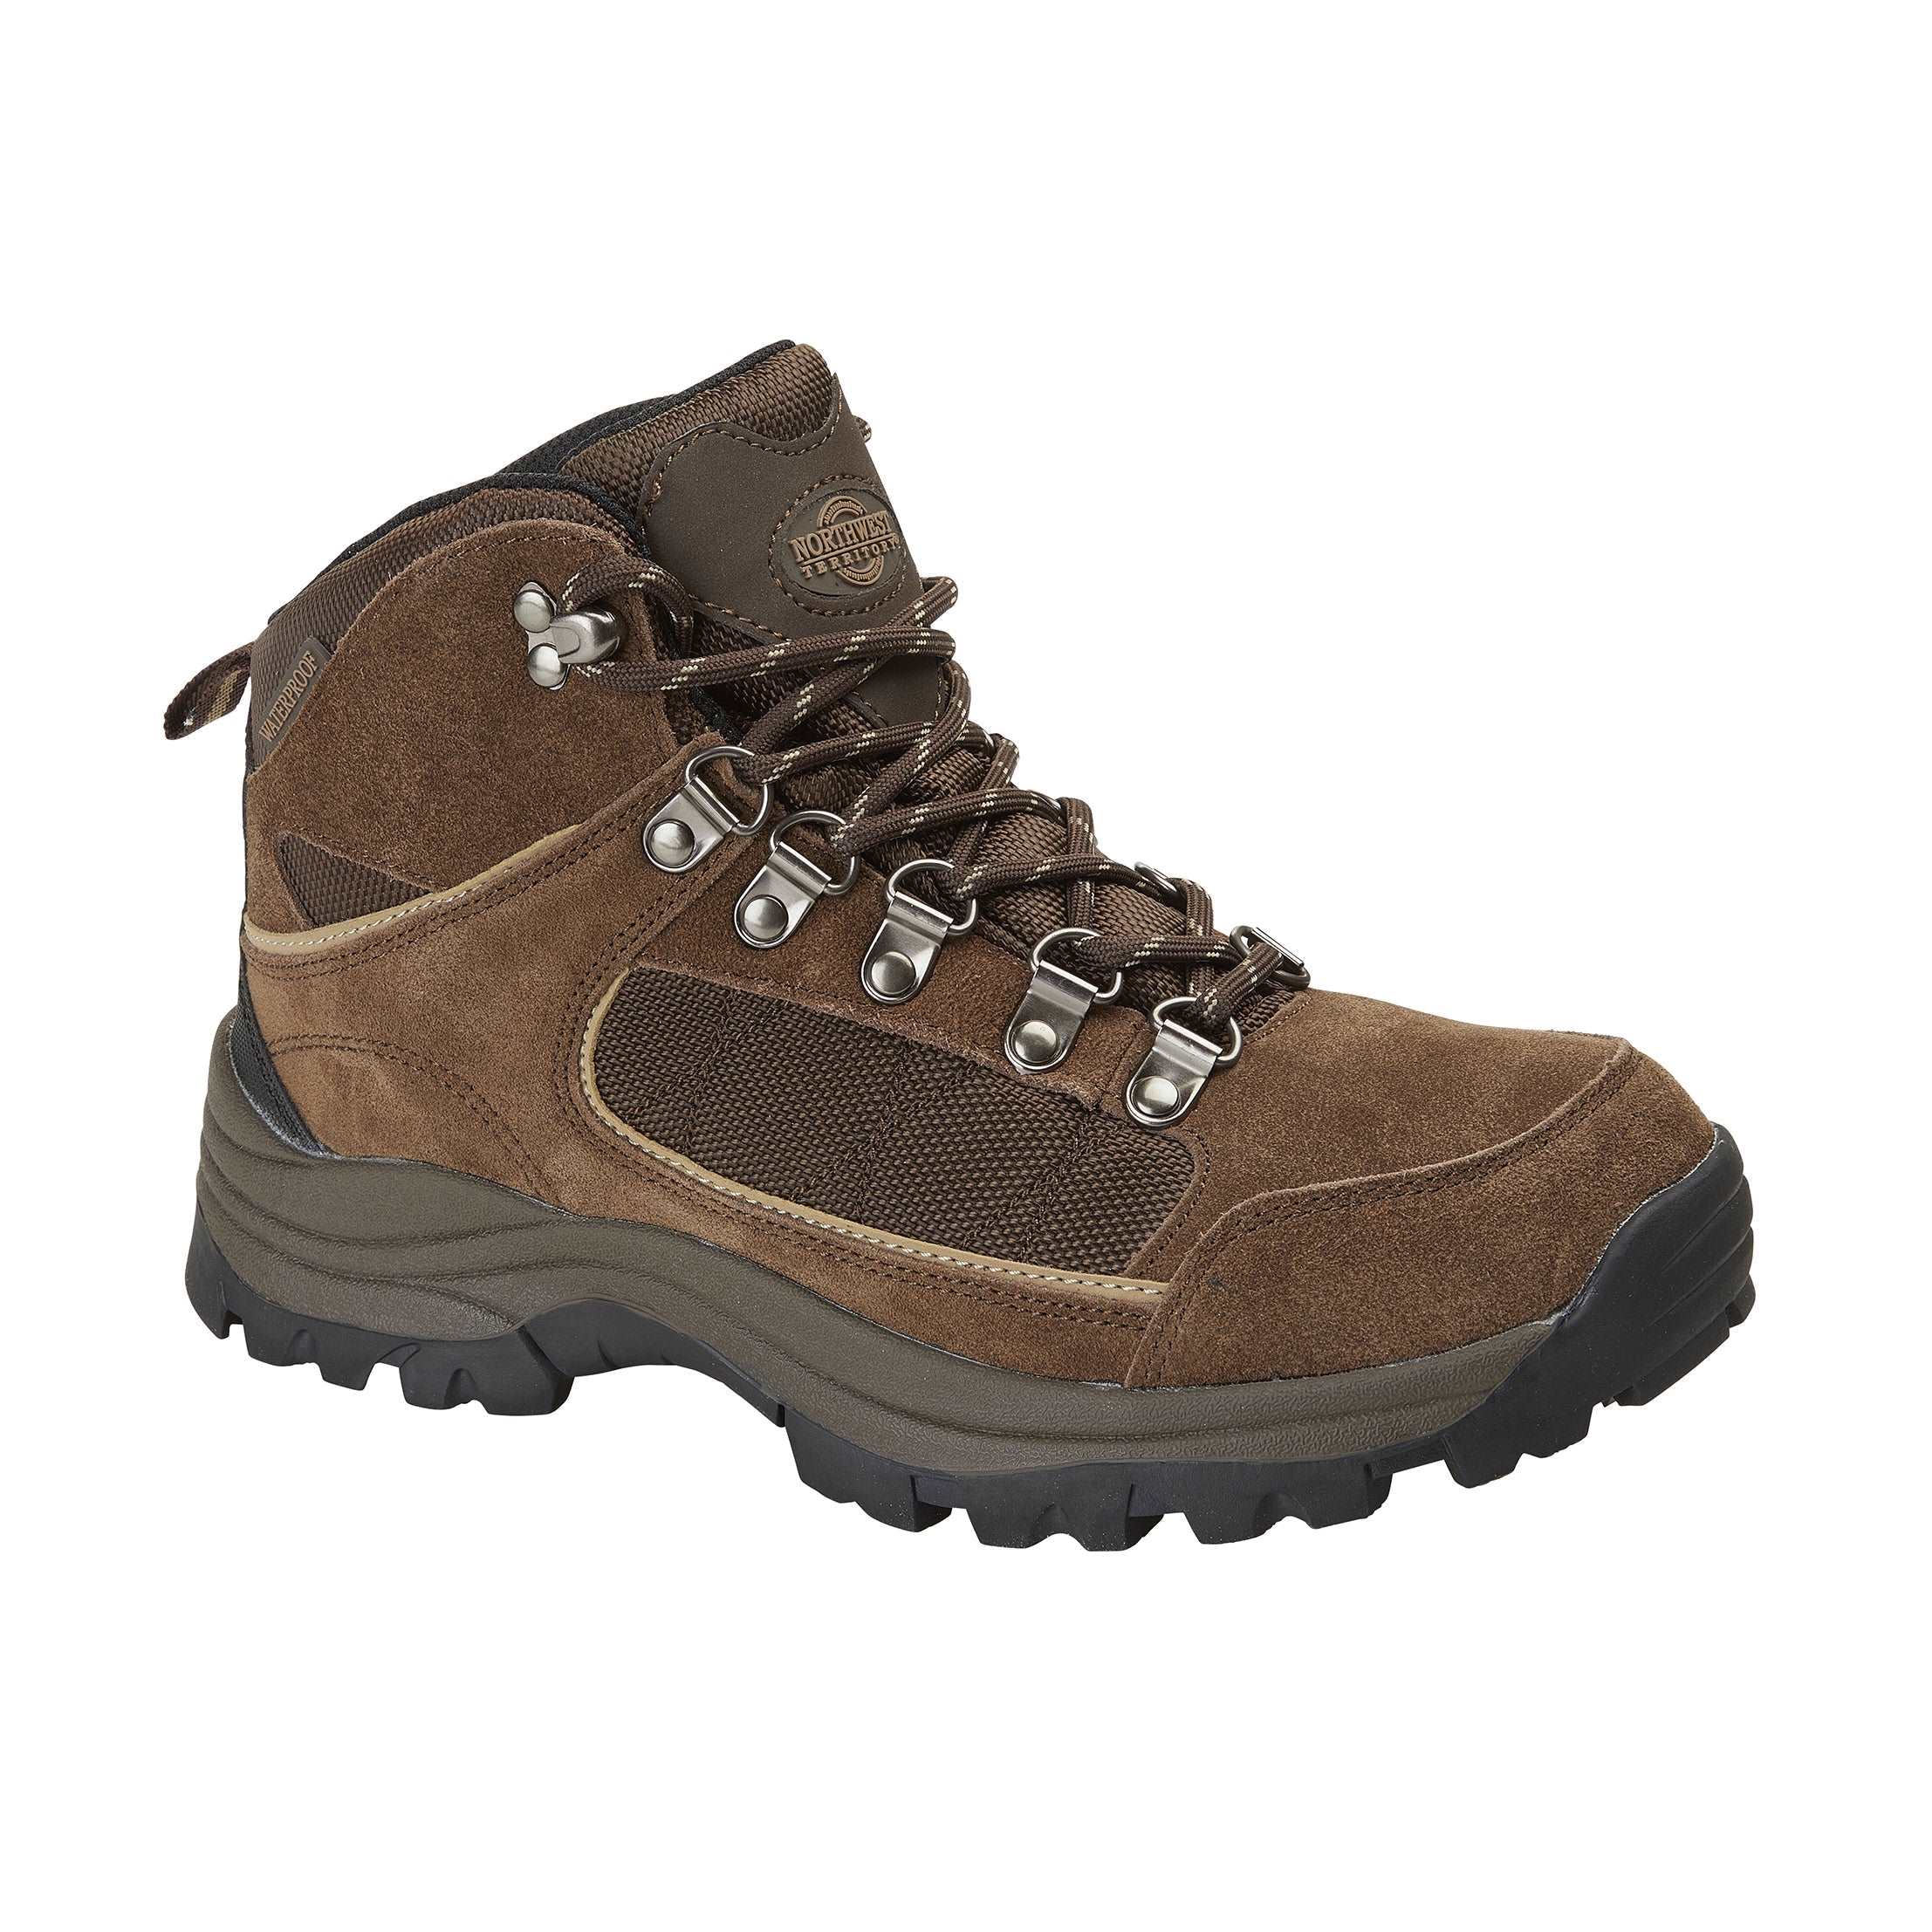 Victoria Suede Waterproof Walking And Hiking Boots